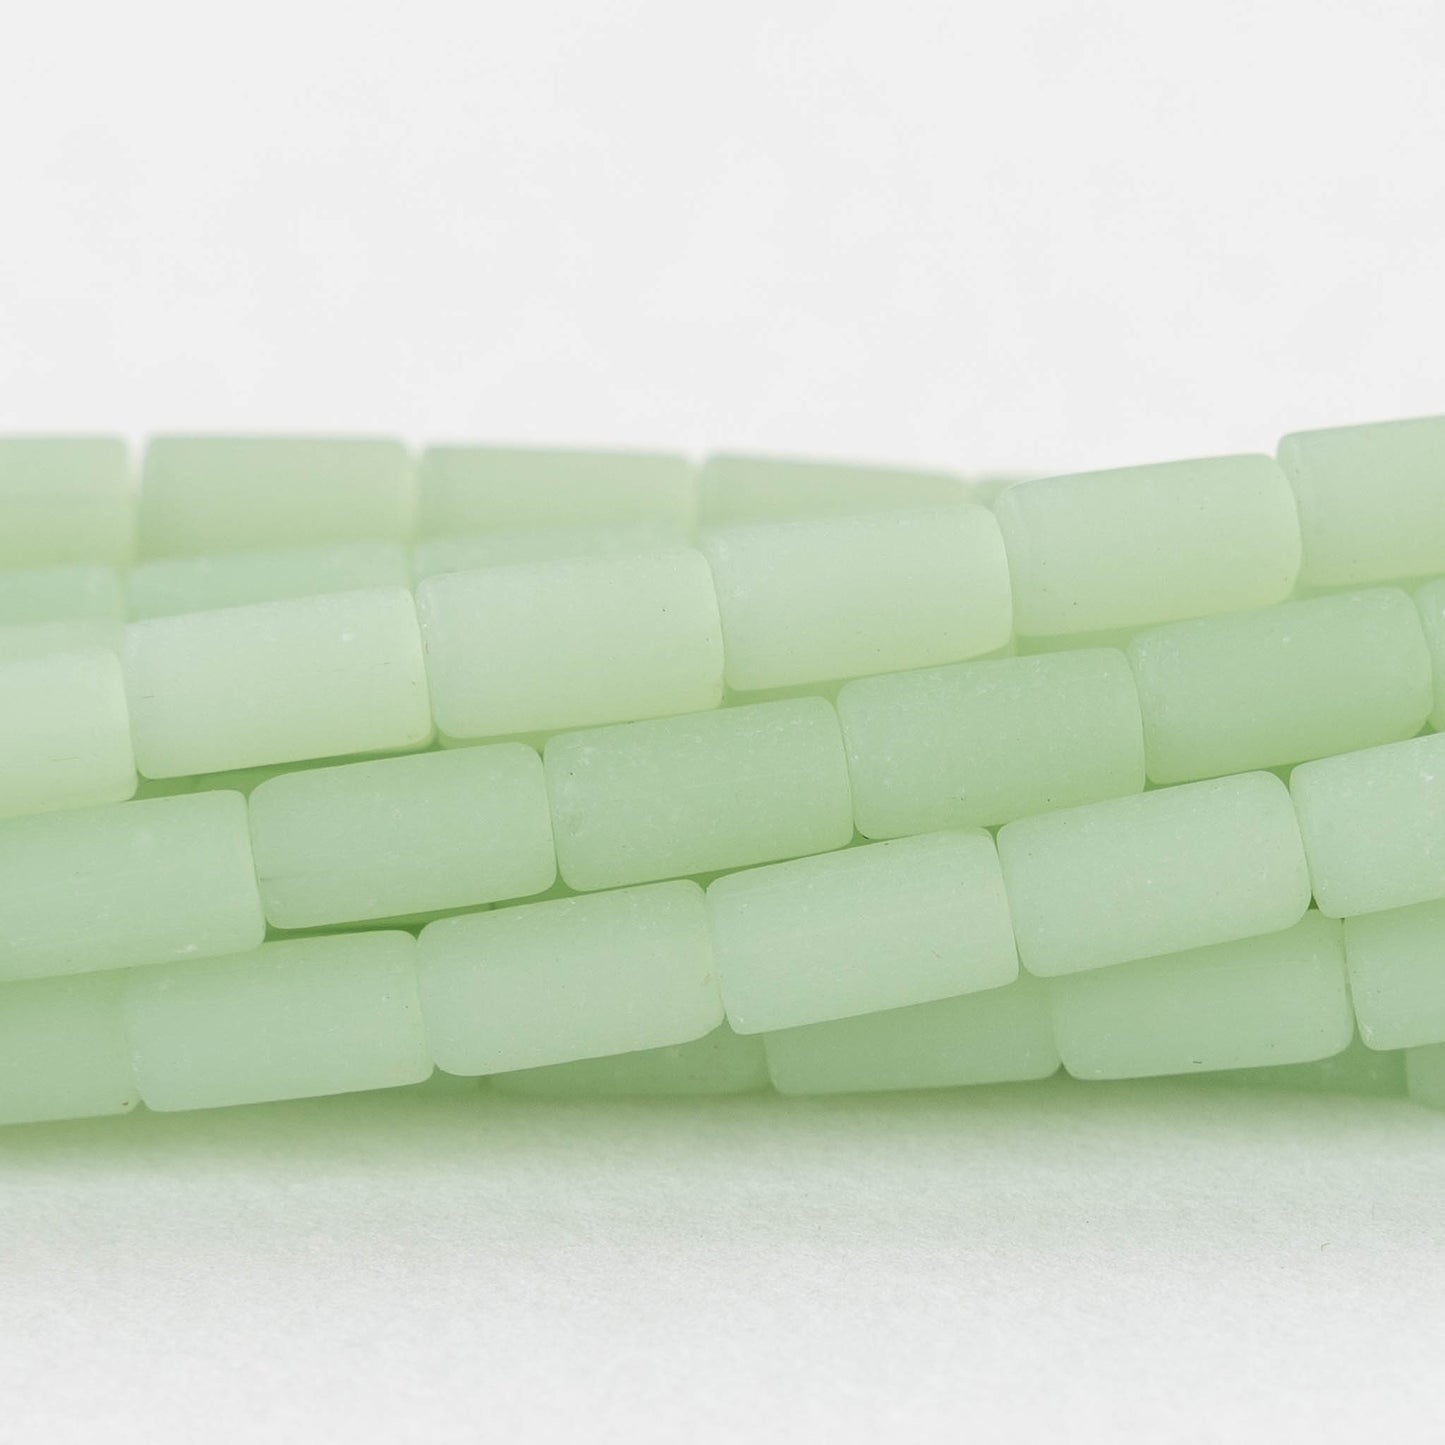 4x9mm Frosted Glass Tube Beads - Lt. Green - 48 Beads